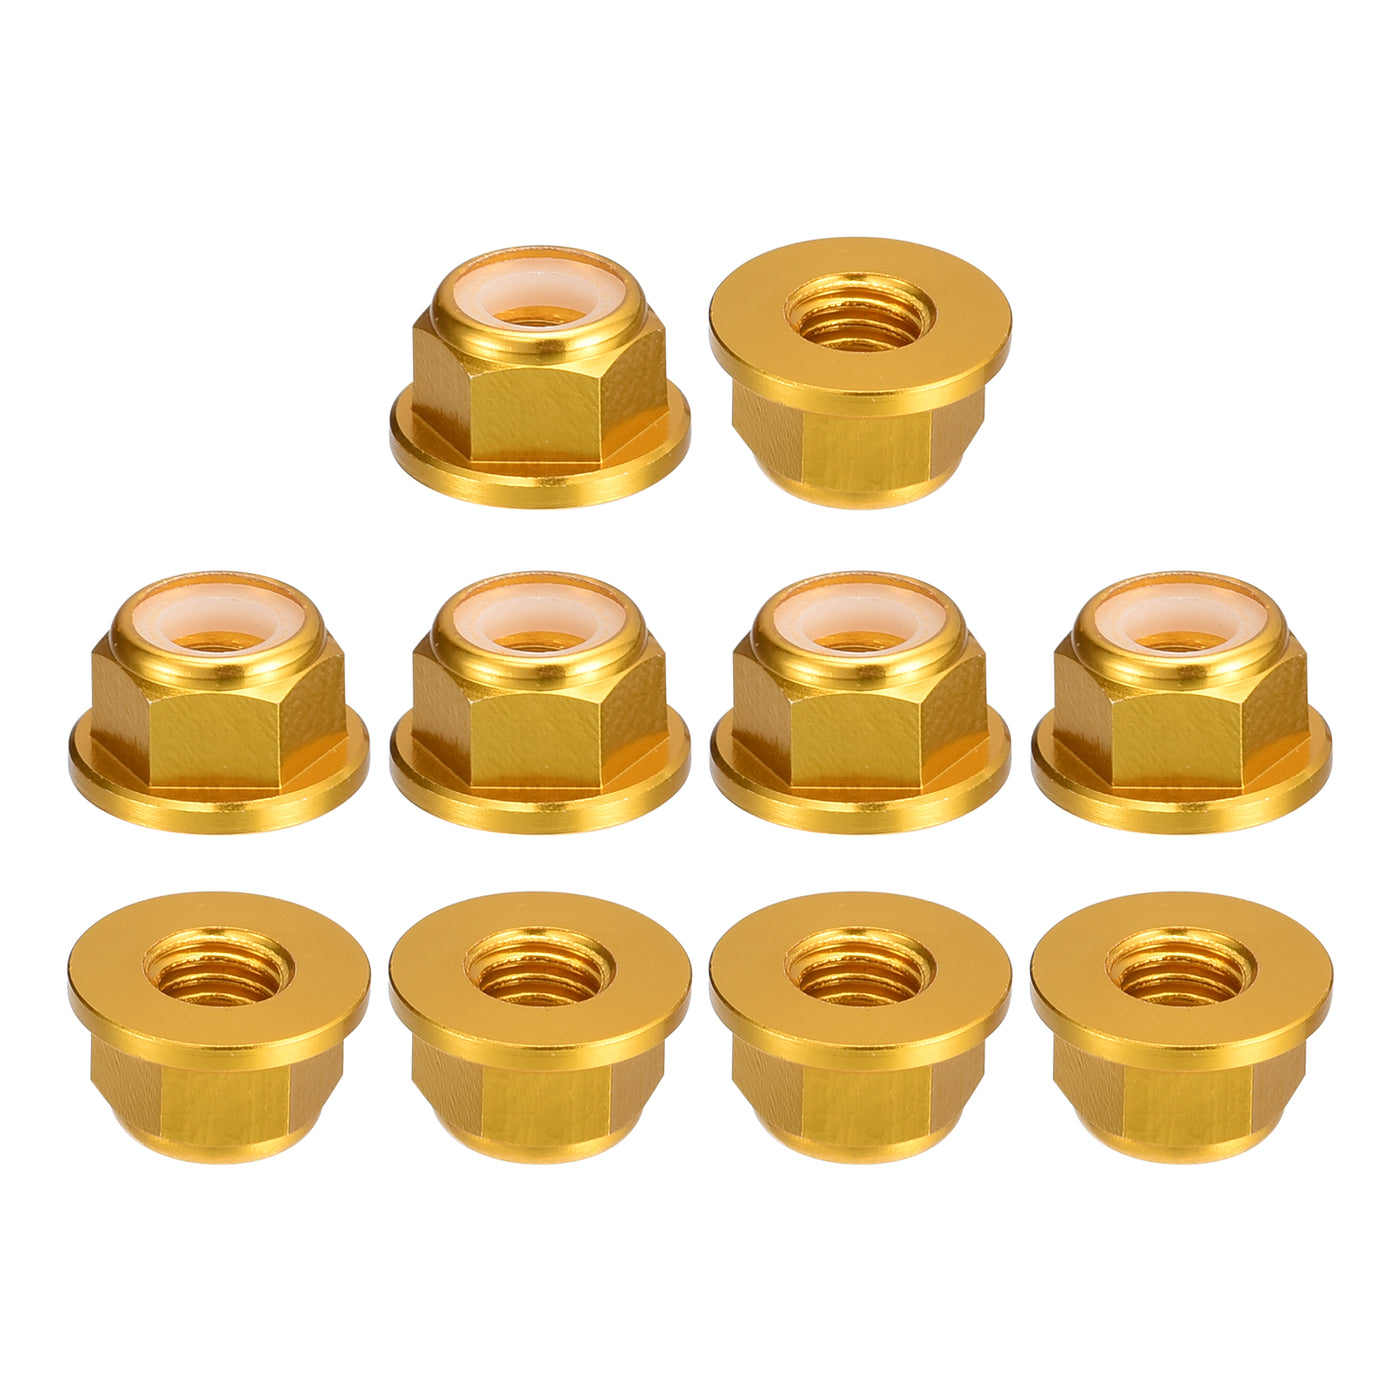 uxcell Uxcell Nylon Insert Hex Lock Nuts, 10pcs - M3 x 0.5mm Aluminum Alloy Self-Locking Nut, Anodizing Flange Lock Nut for Fasteners (Gold)